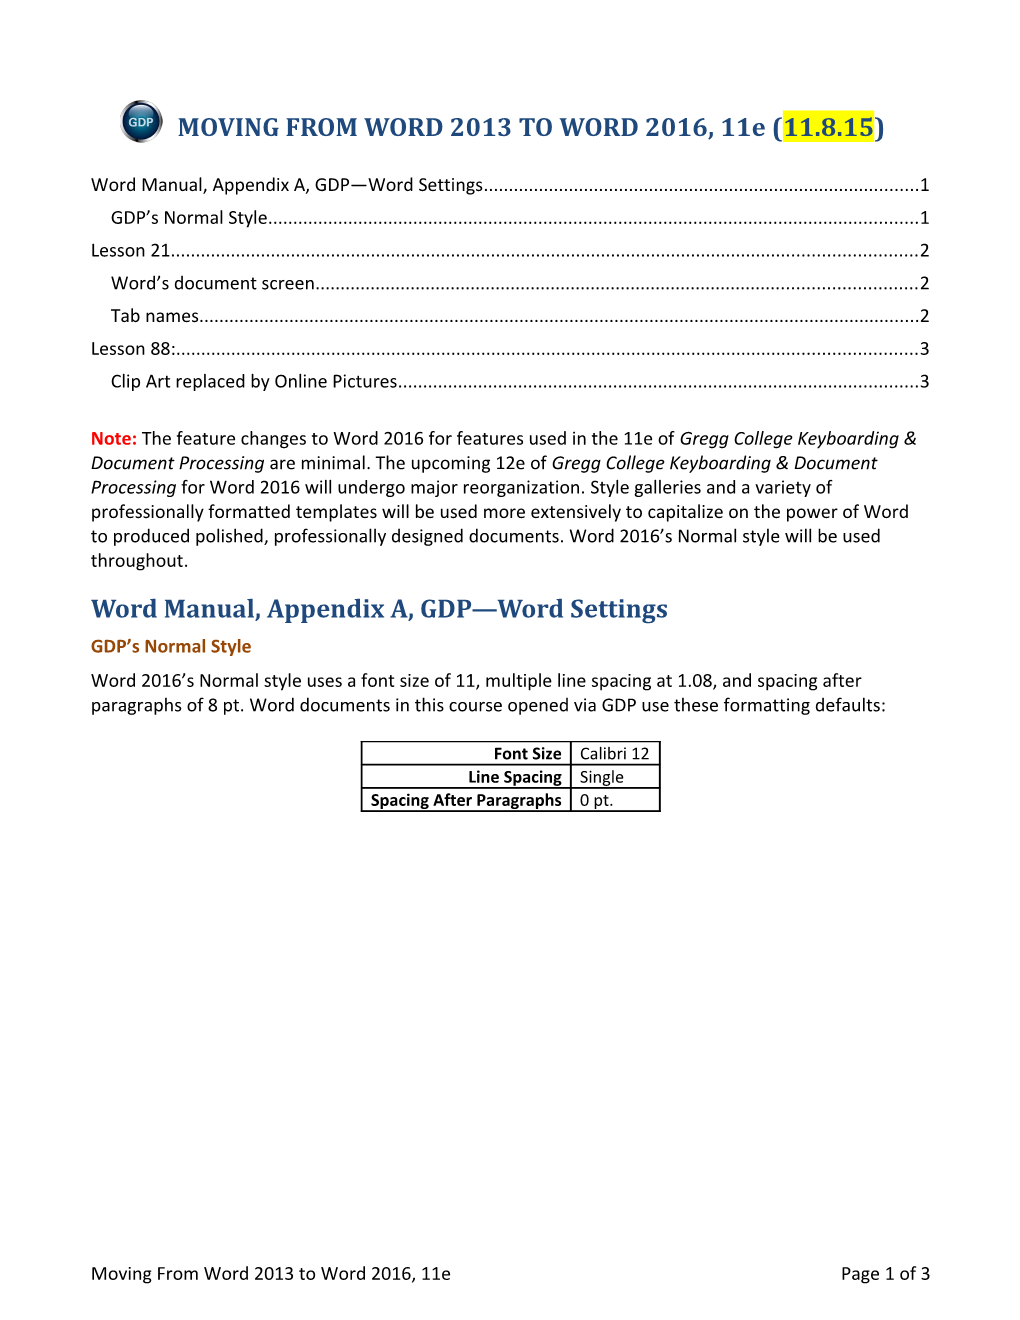 Word Manual, Appendix A, GDP Word Settings